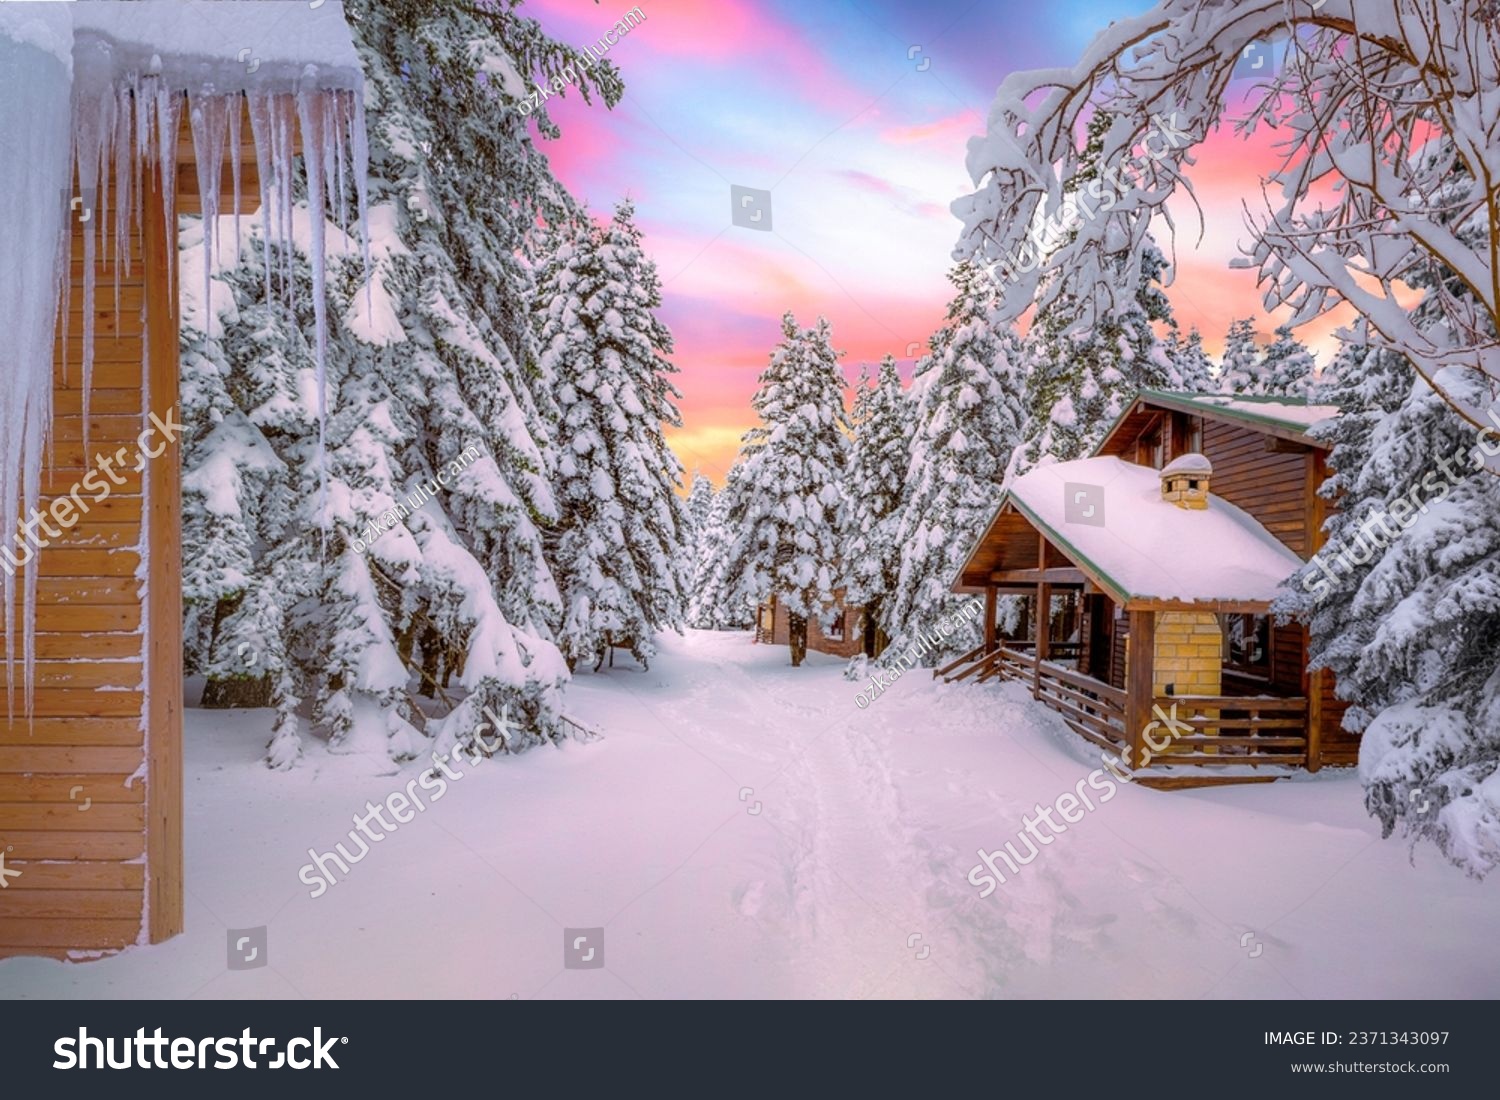 Snowy winter landscape in beautiful view of colorful sunset with wooden forest houses in cold snowy mountains at christmas time. Winter wonderland in snowy forest. Uludag mountain, Bursa city, Turkey. #2371343097